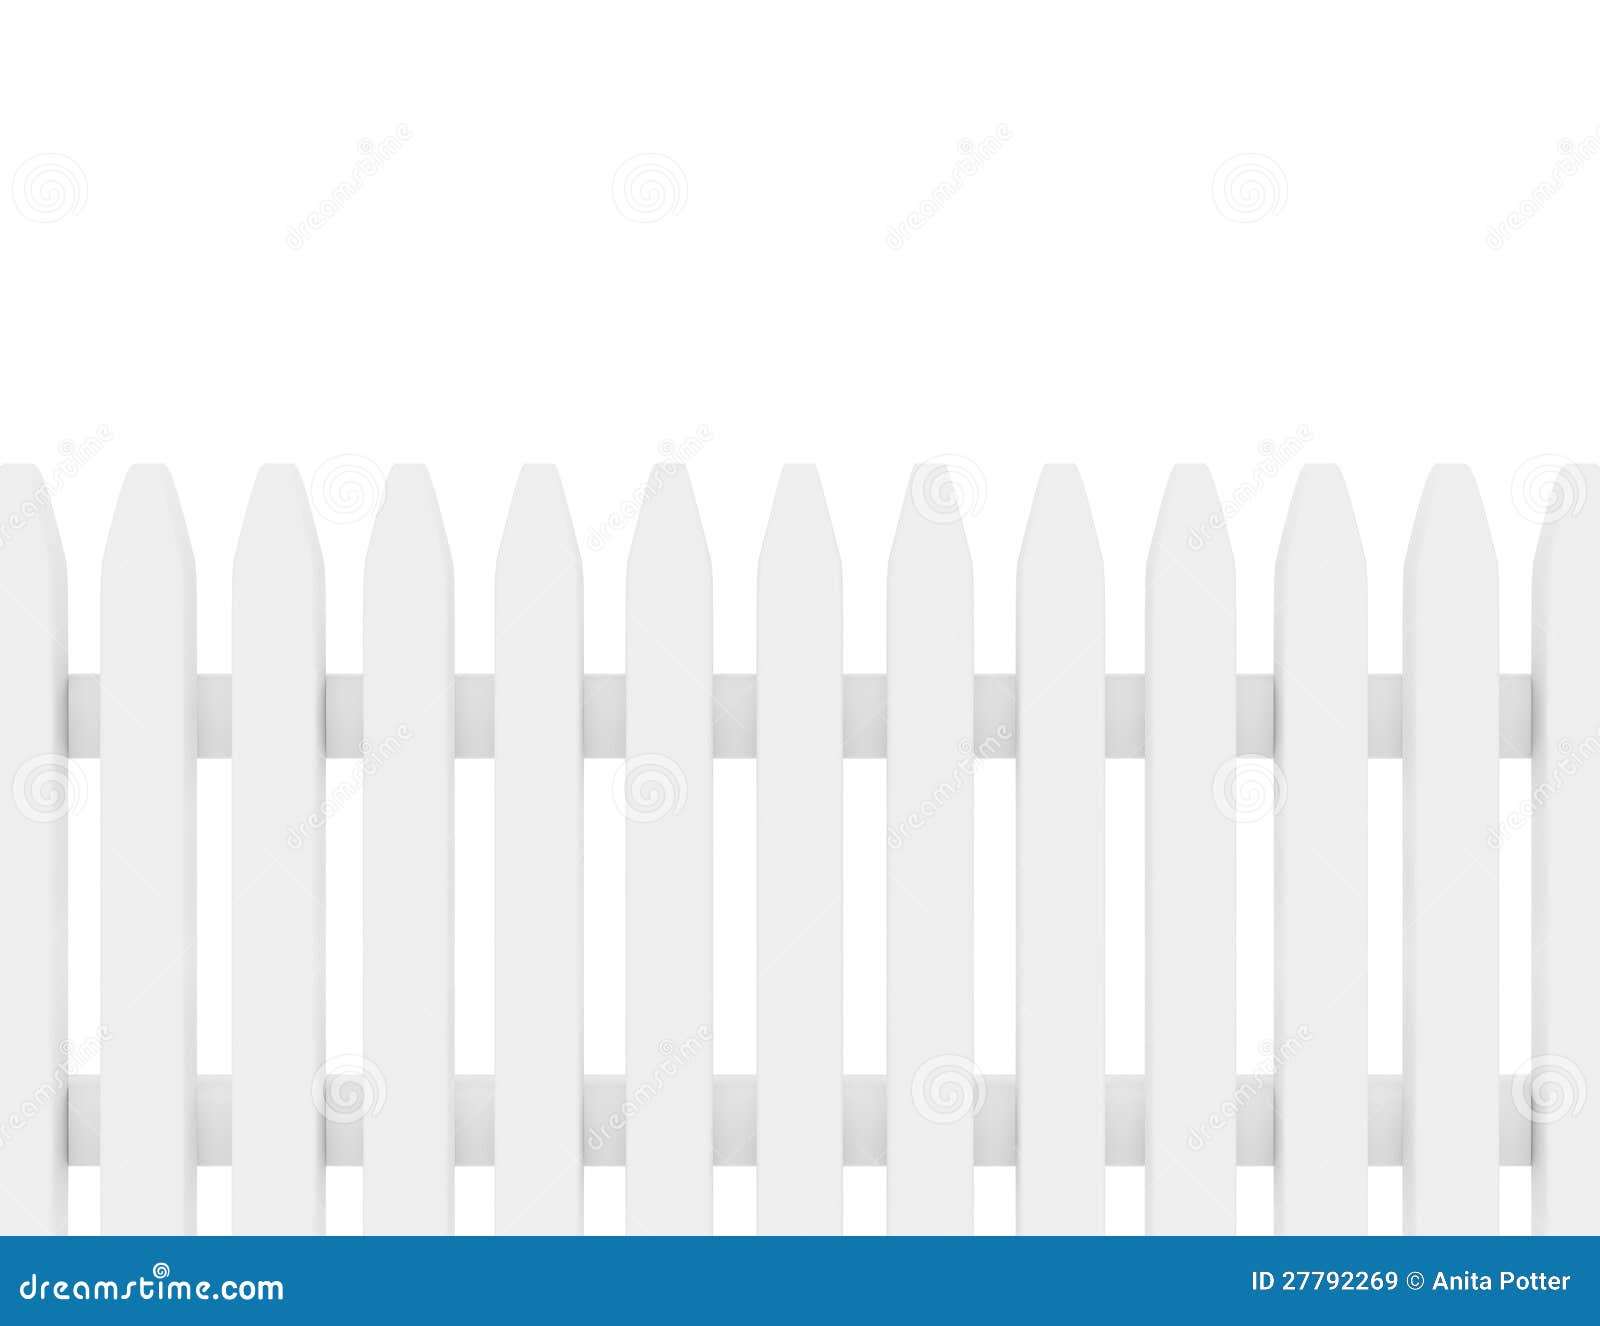 3d Render Of A White Picket Fence Stock Illustration - Image: 27792269